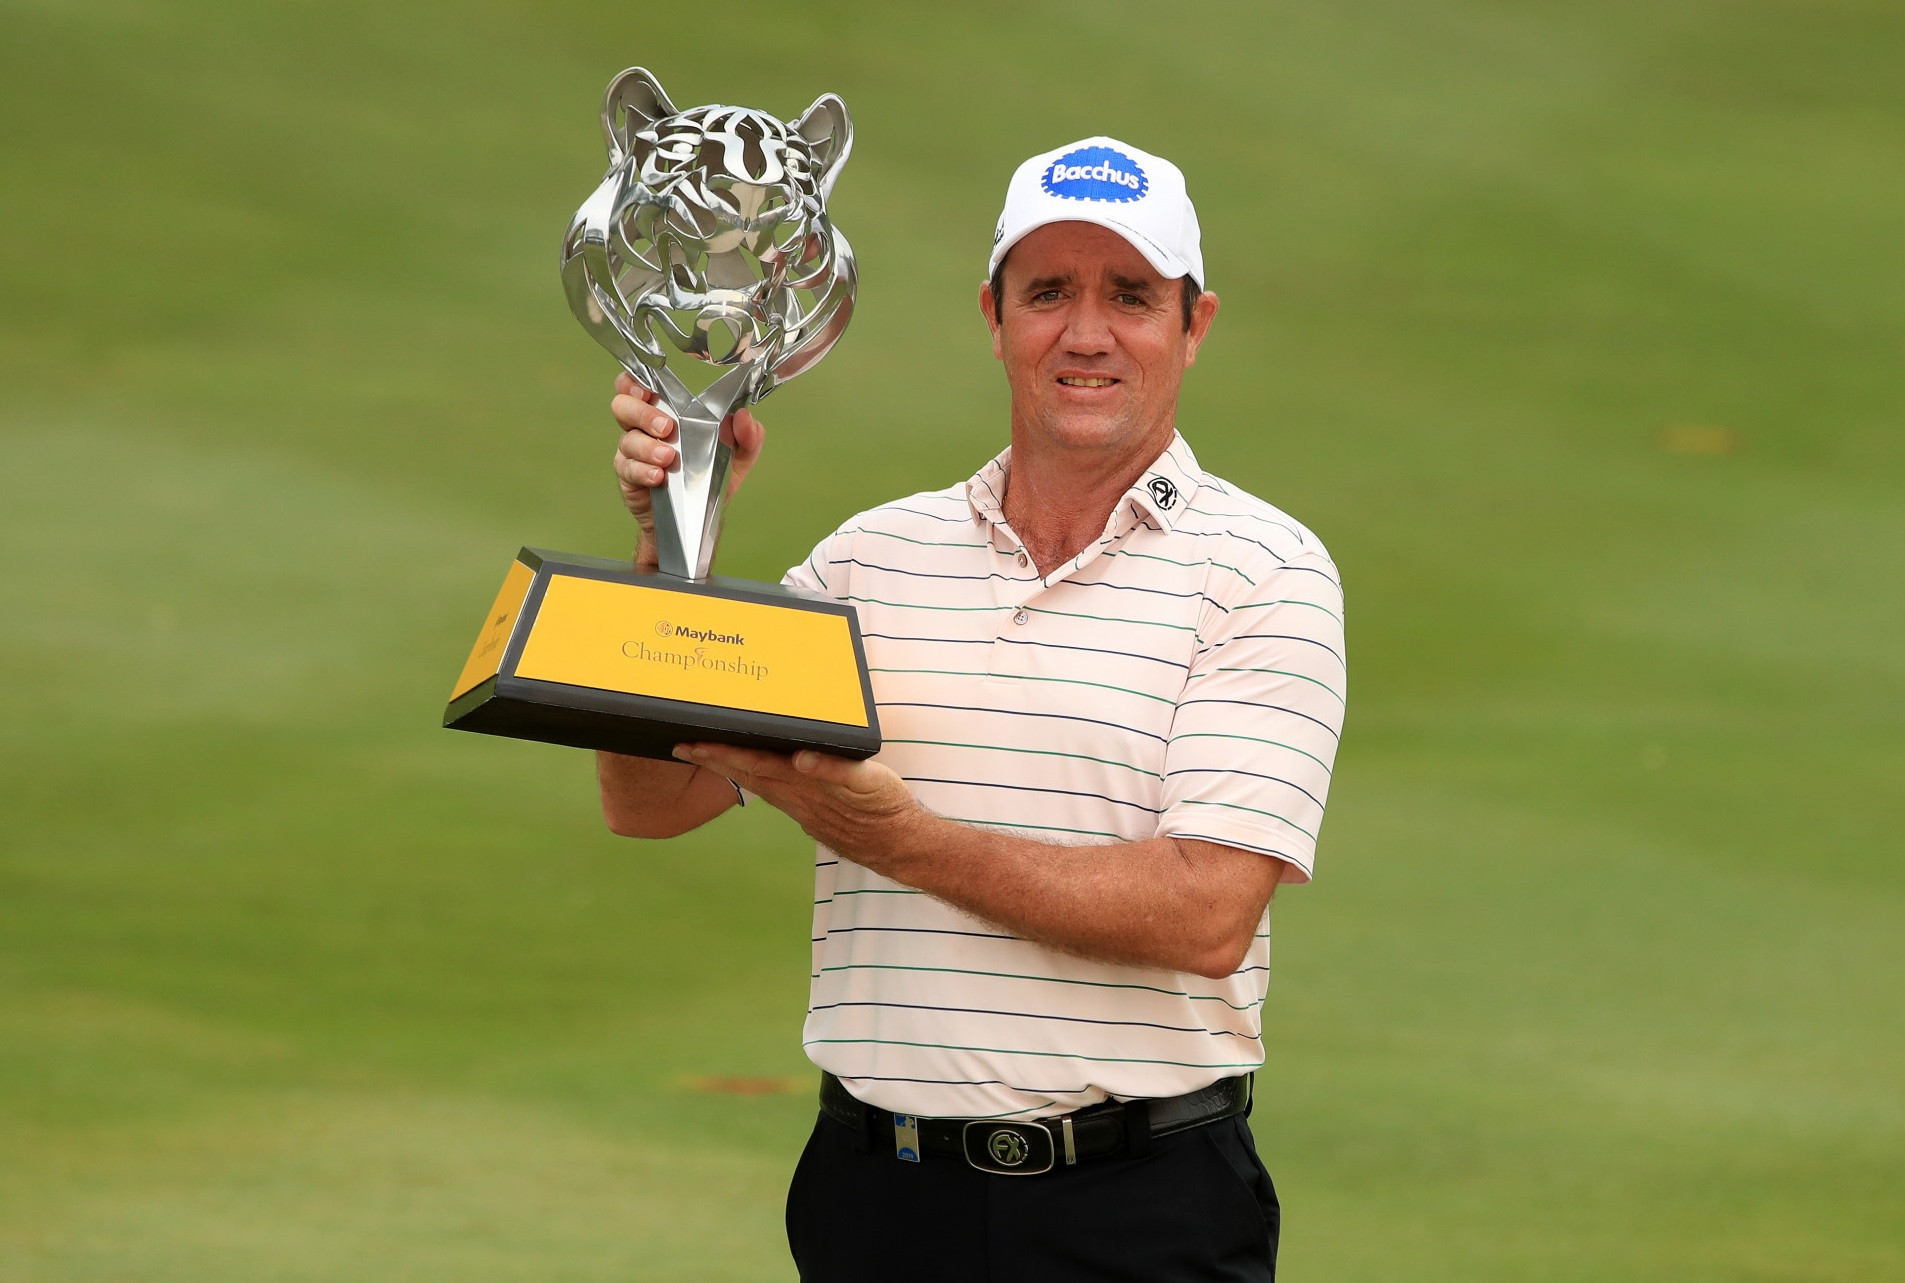 Scott Hend, pictured with the trophy, will not be able to defend the Maybank Championship this year as the event has been postponed due to the coronavirus outbreak ©Getty Images